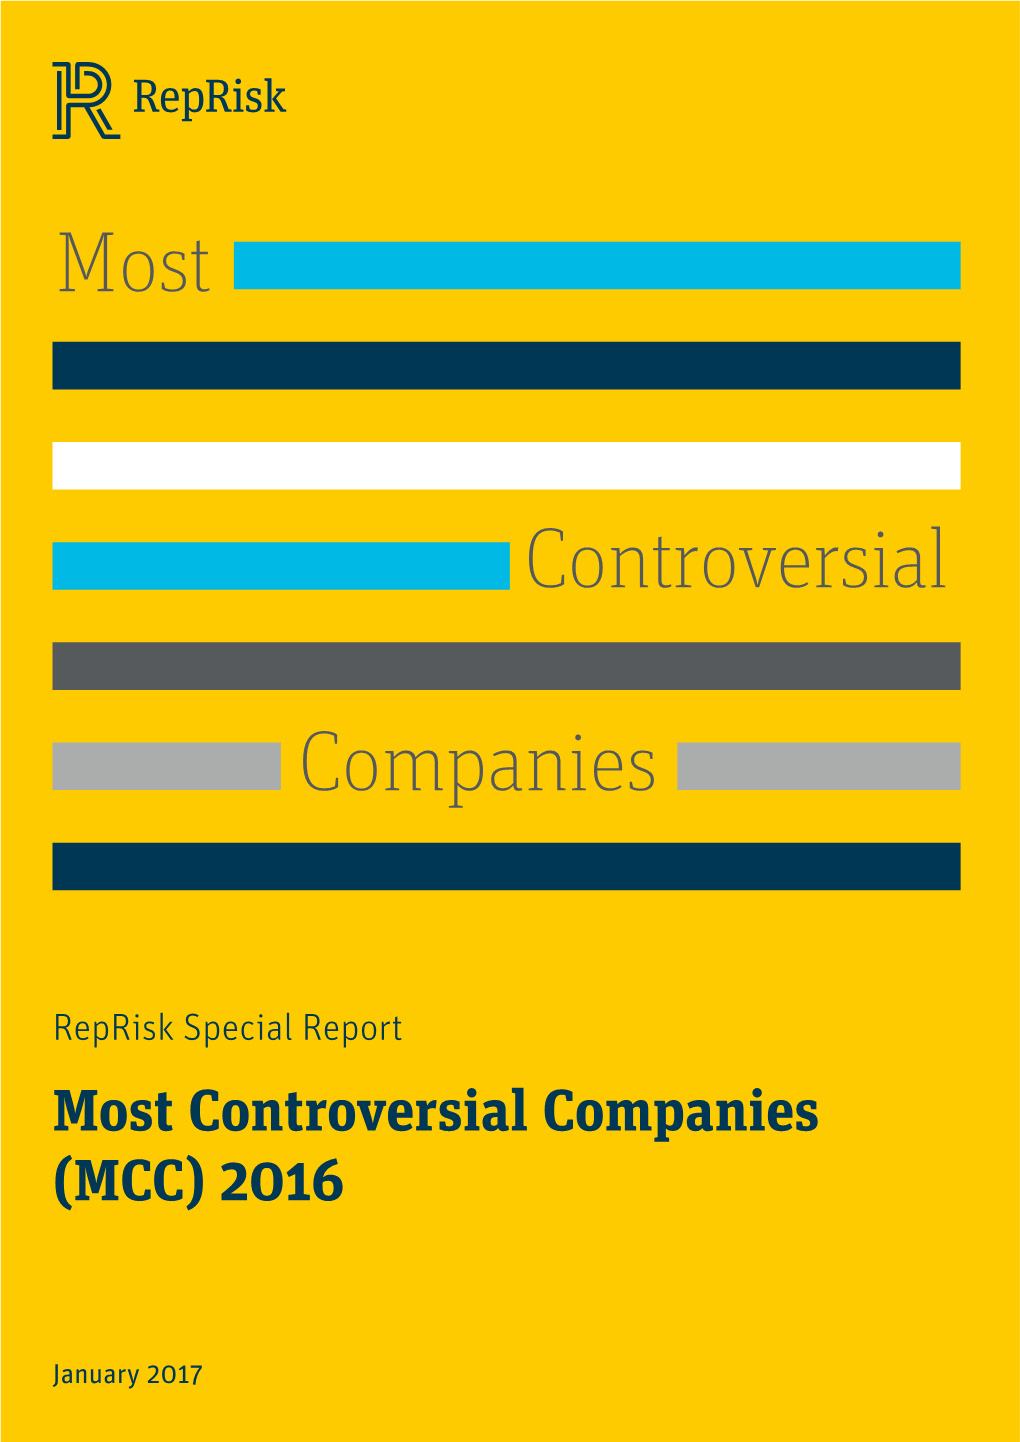 Most Controversial Companies (MCC) 2016